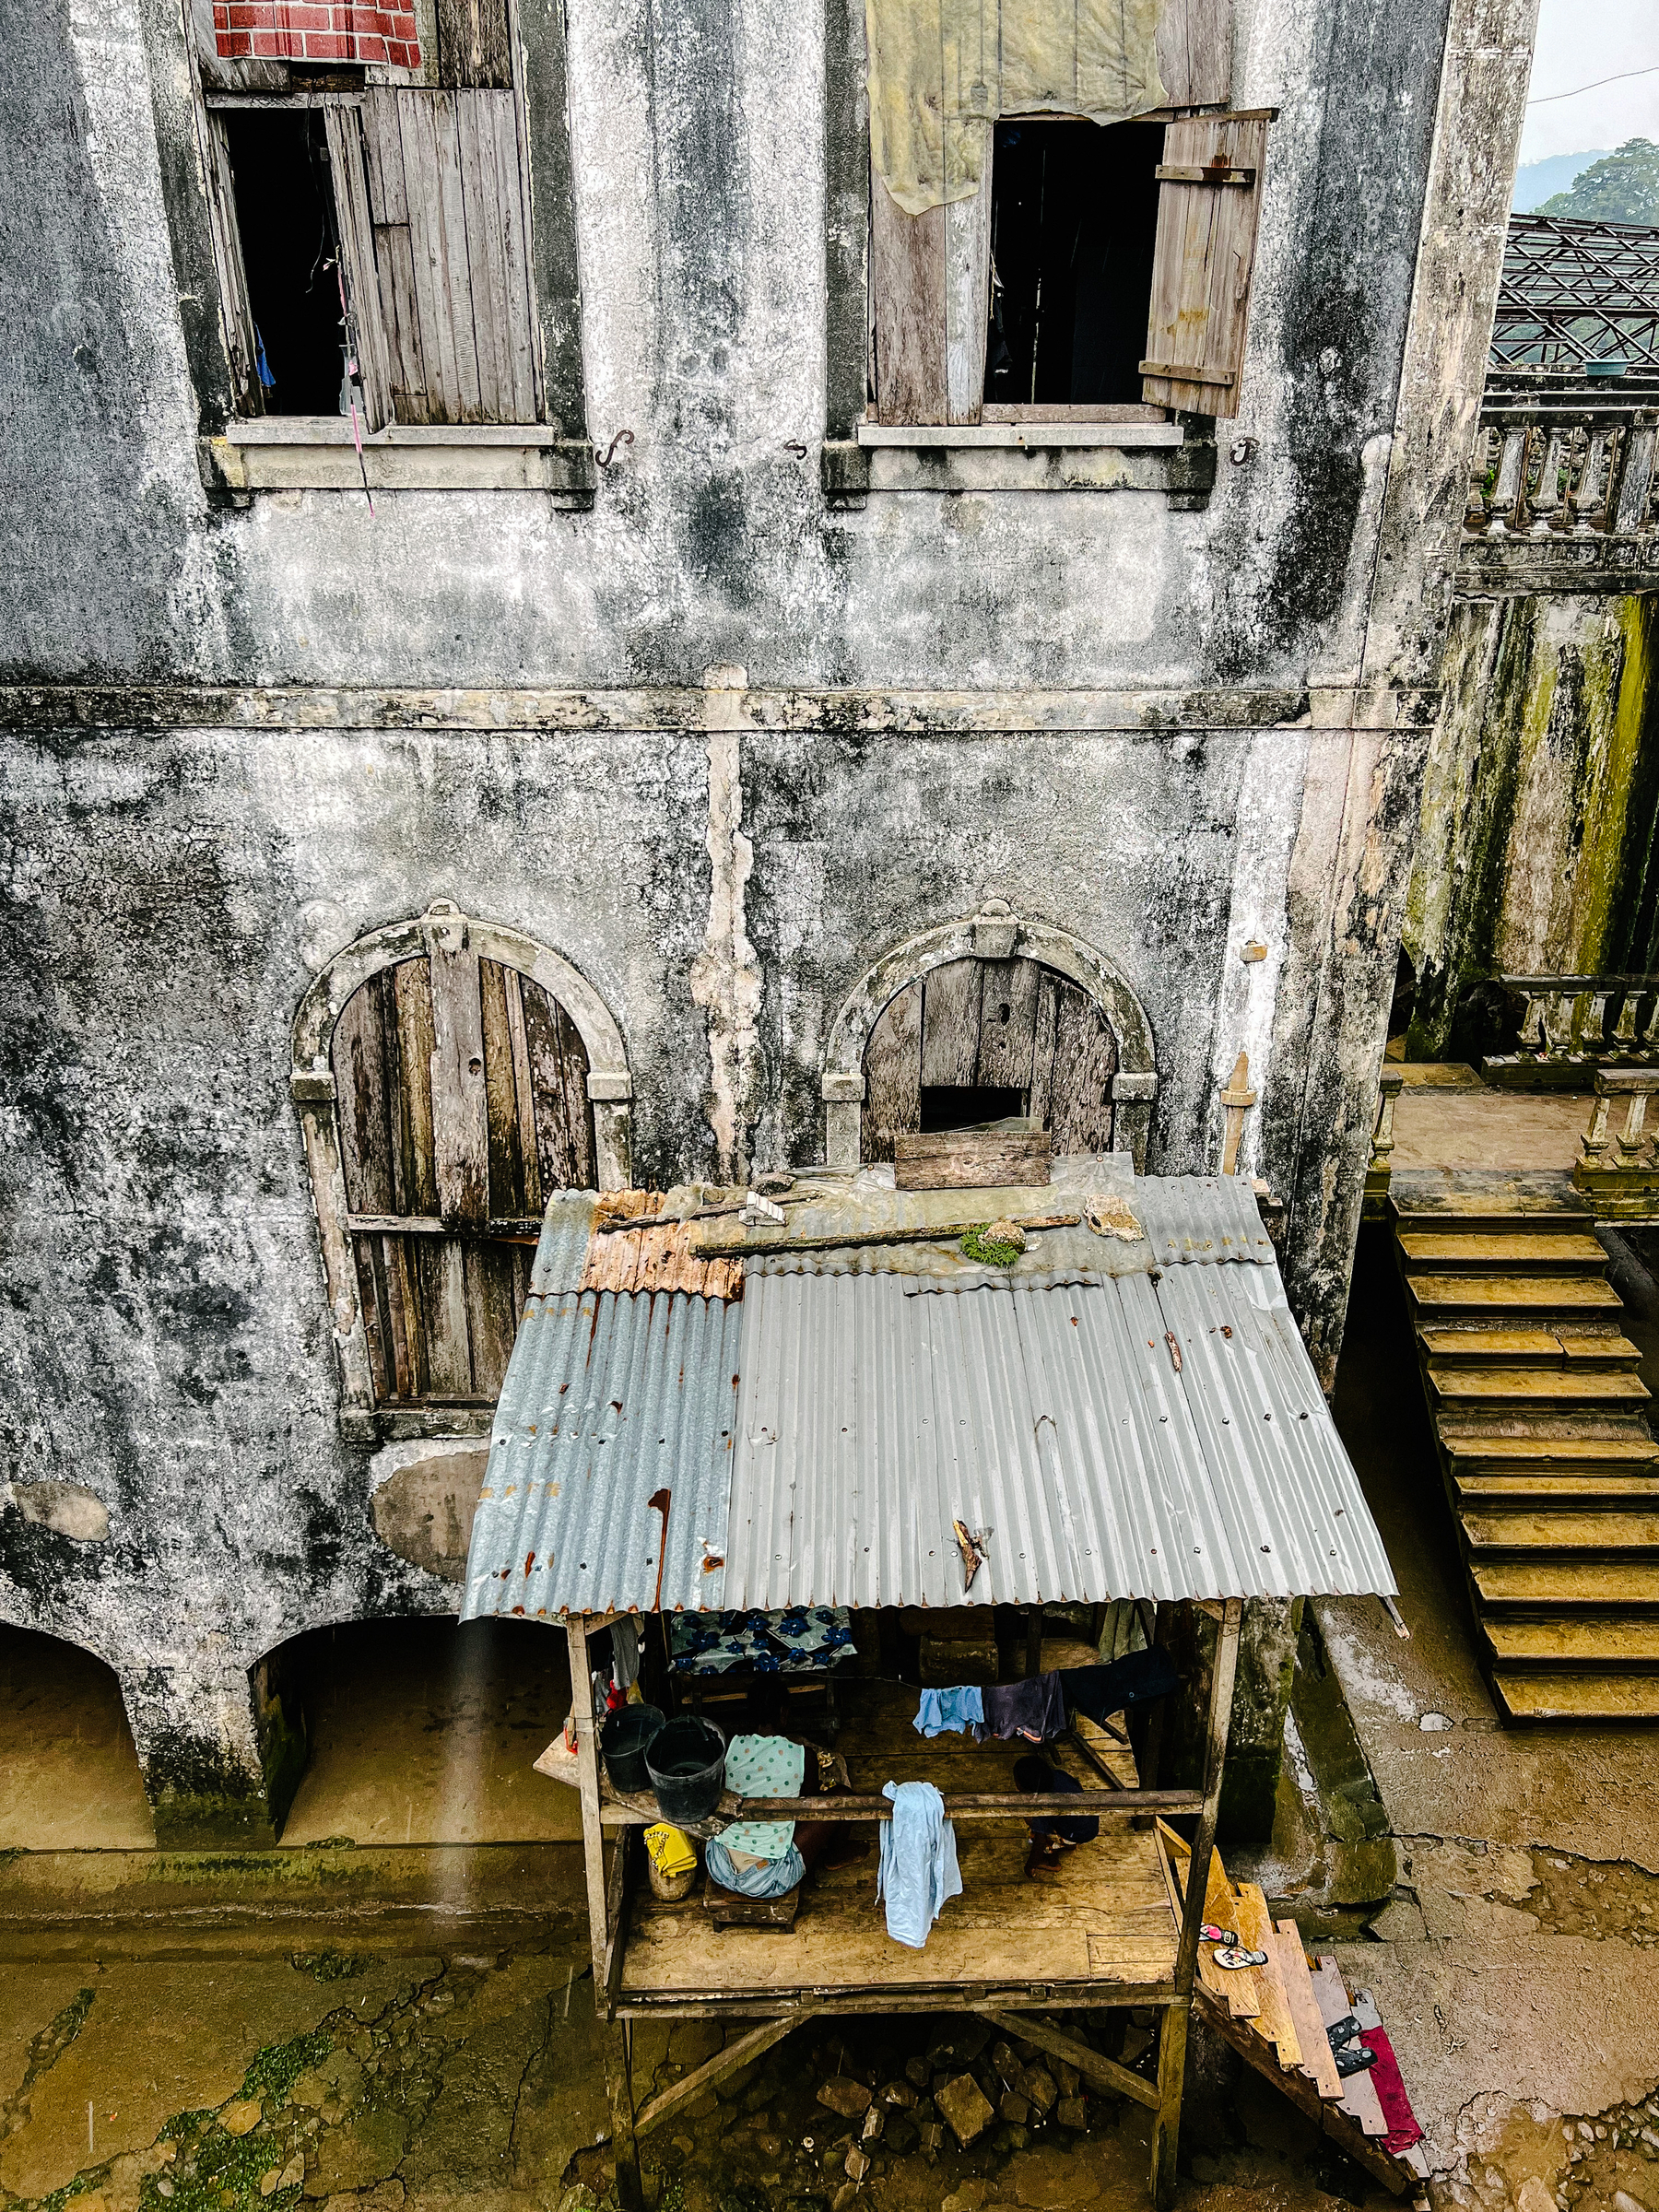 Looking down on a dilapidated building. 